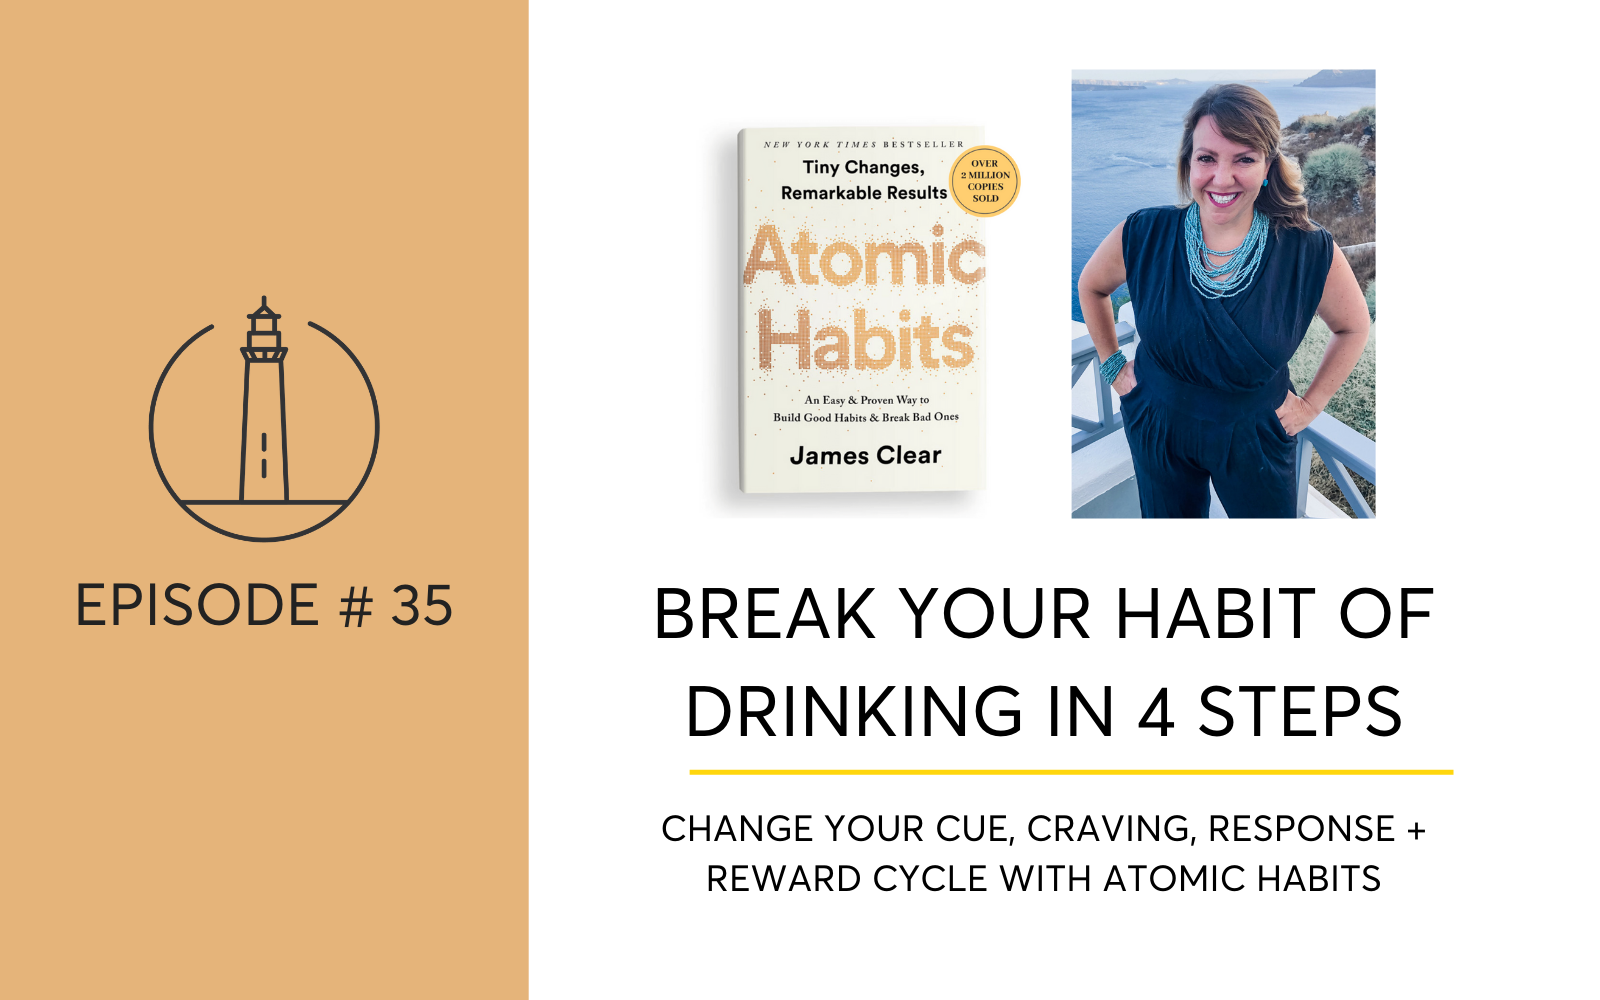 Break The Habit Of Drinking With Cues, Cravings, Responses + Rewards I Atomic Habits I James Clear